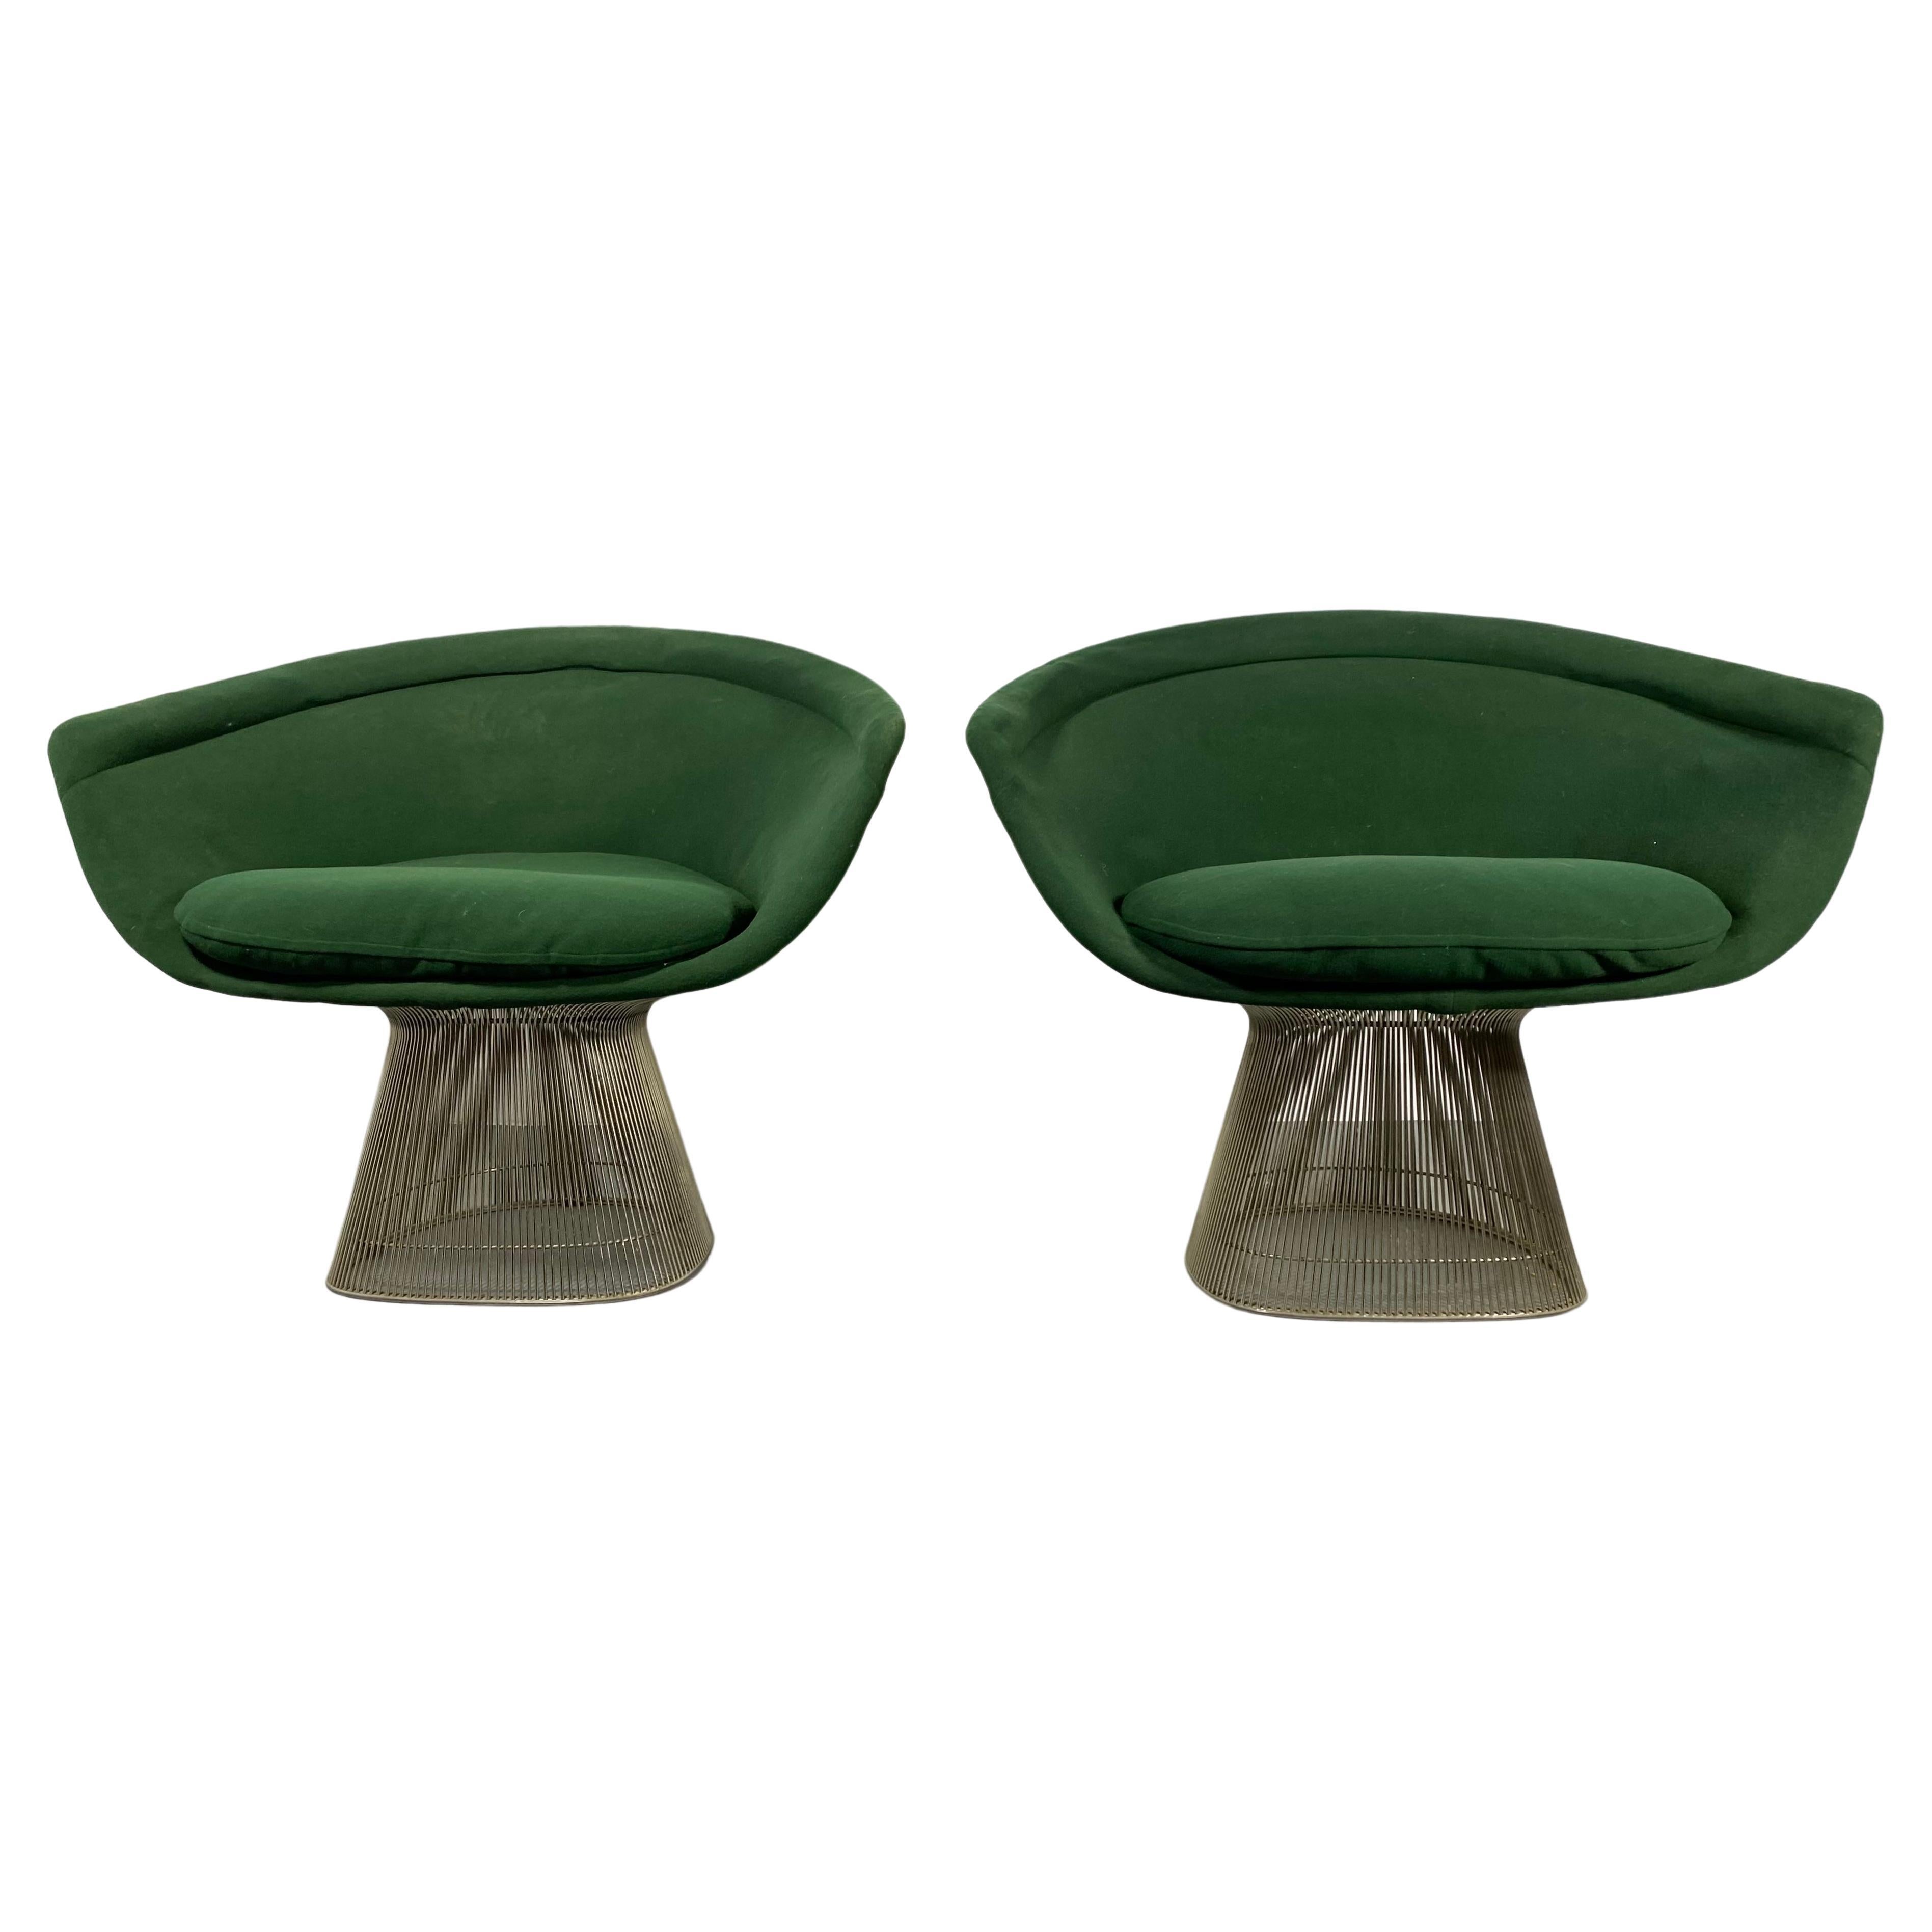 Pair Warren Platner Lounge Chairs, Classic Modernist, Manufactured by Knoll